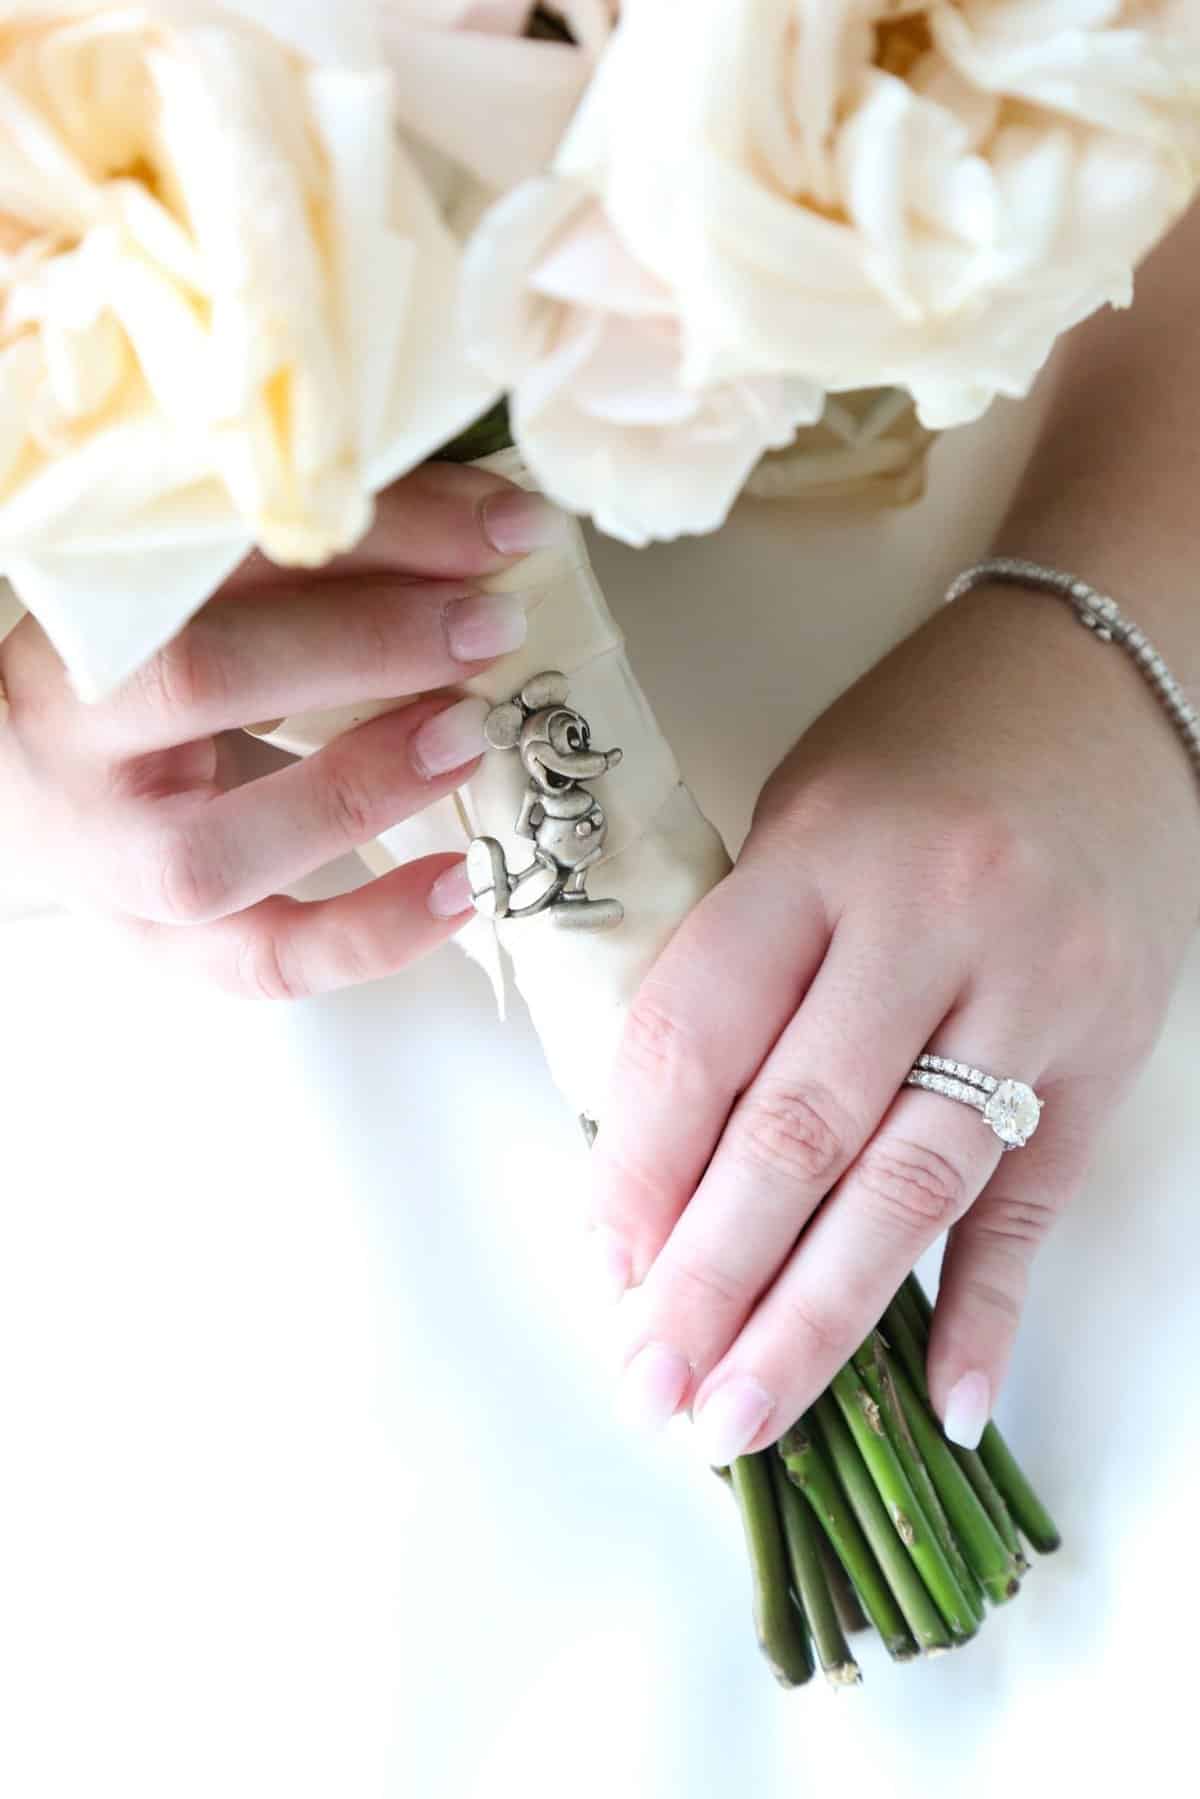 Disney Vow Renewal - Just Marry Weddings - Caldwell Photography - Bouquet Details